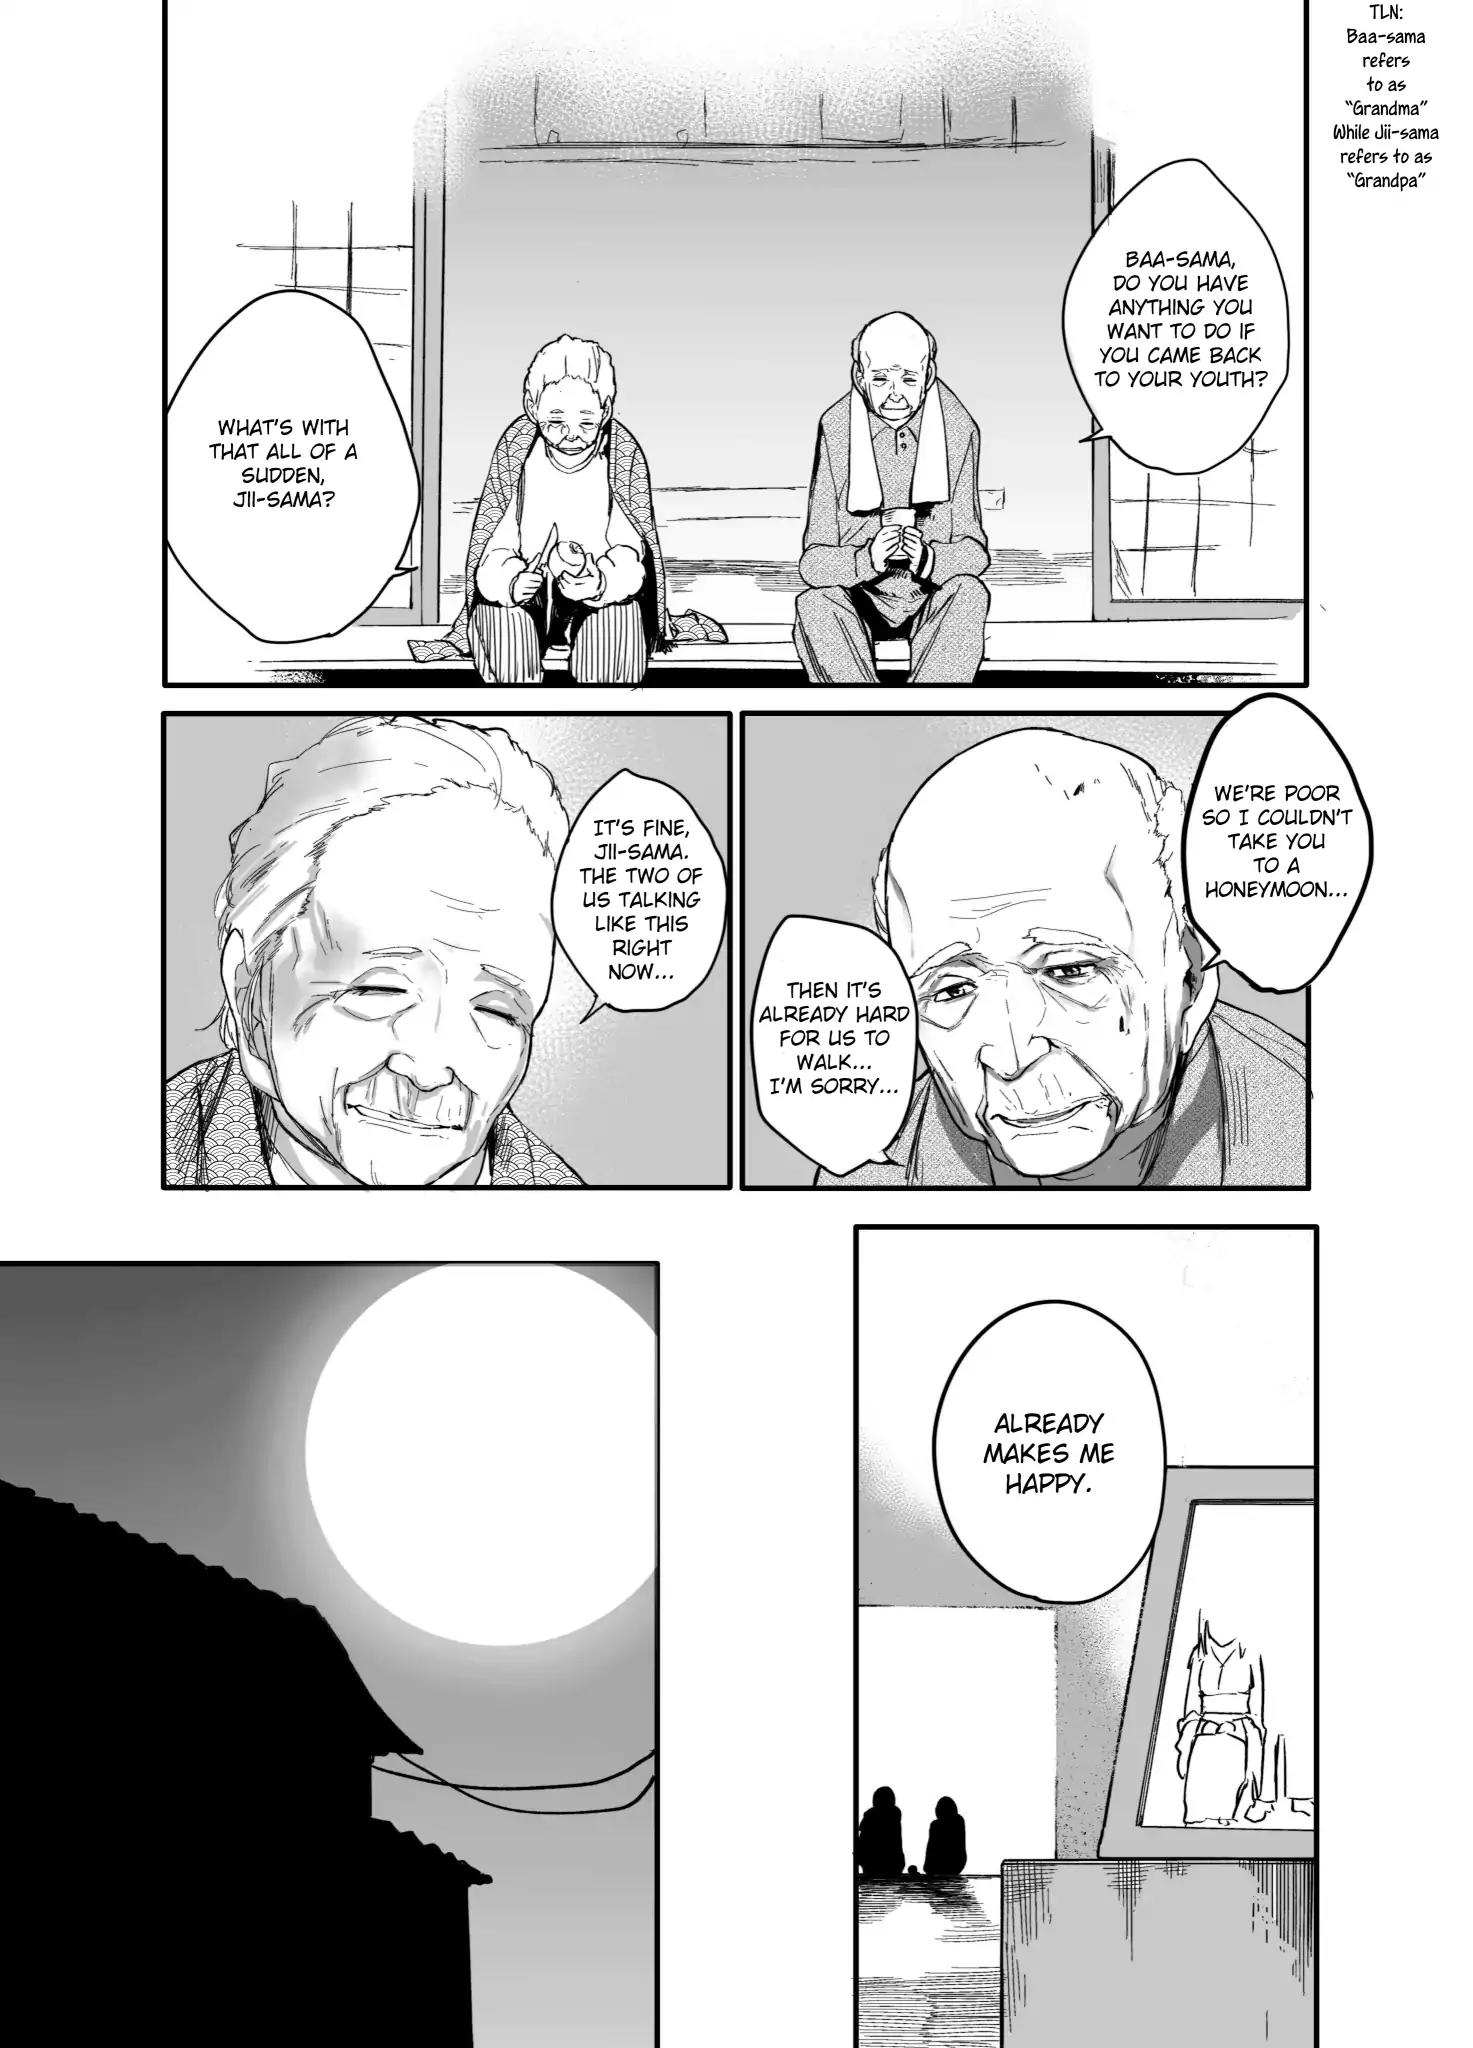 A Story About a Grandpa and Grandma Who Returned Back to Their Youth Chapter 1